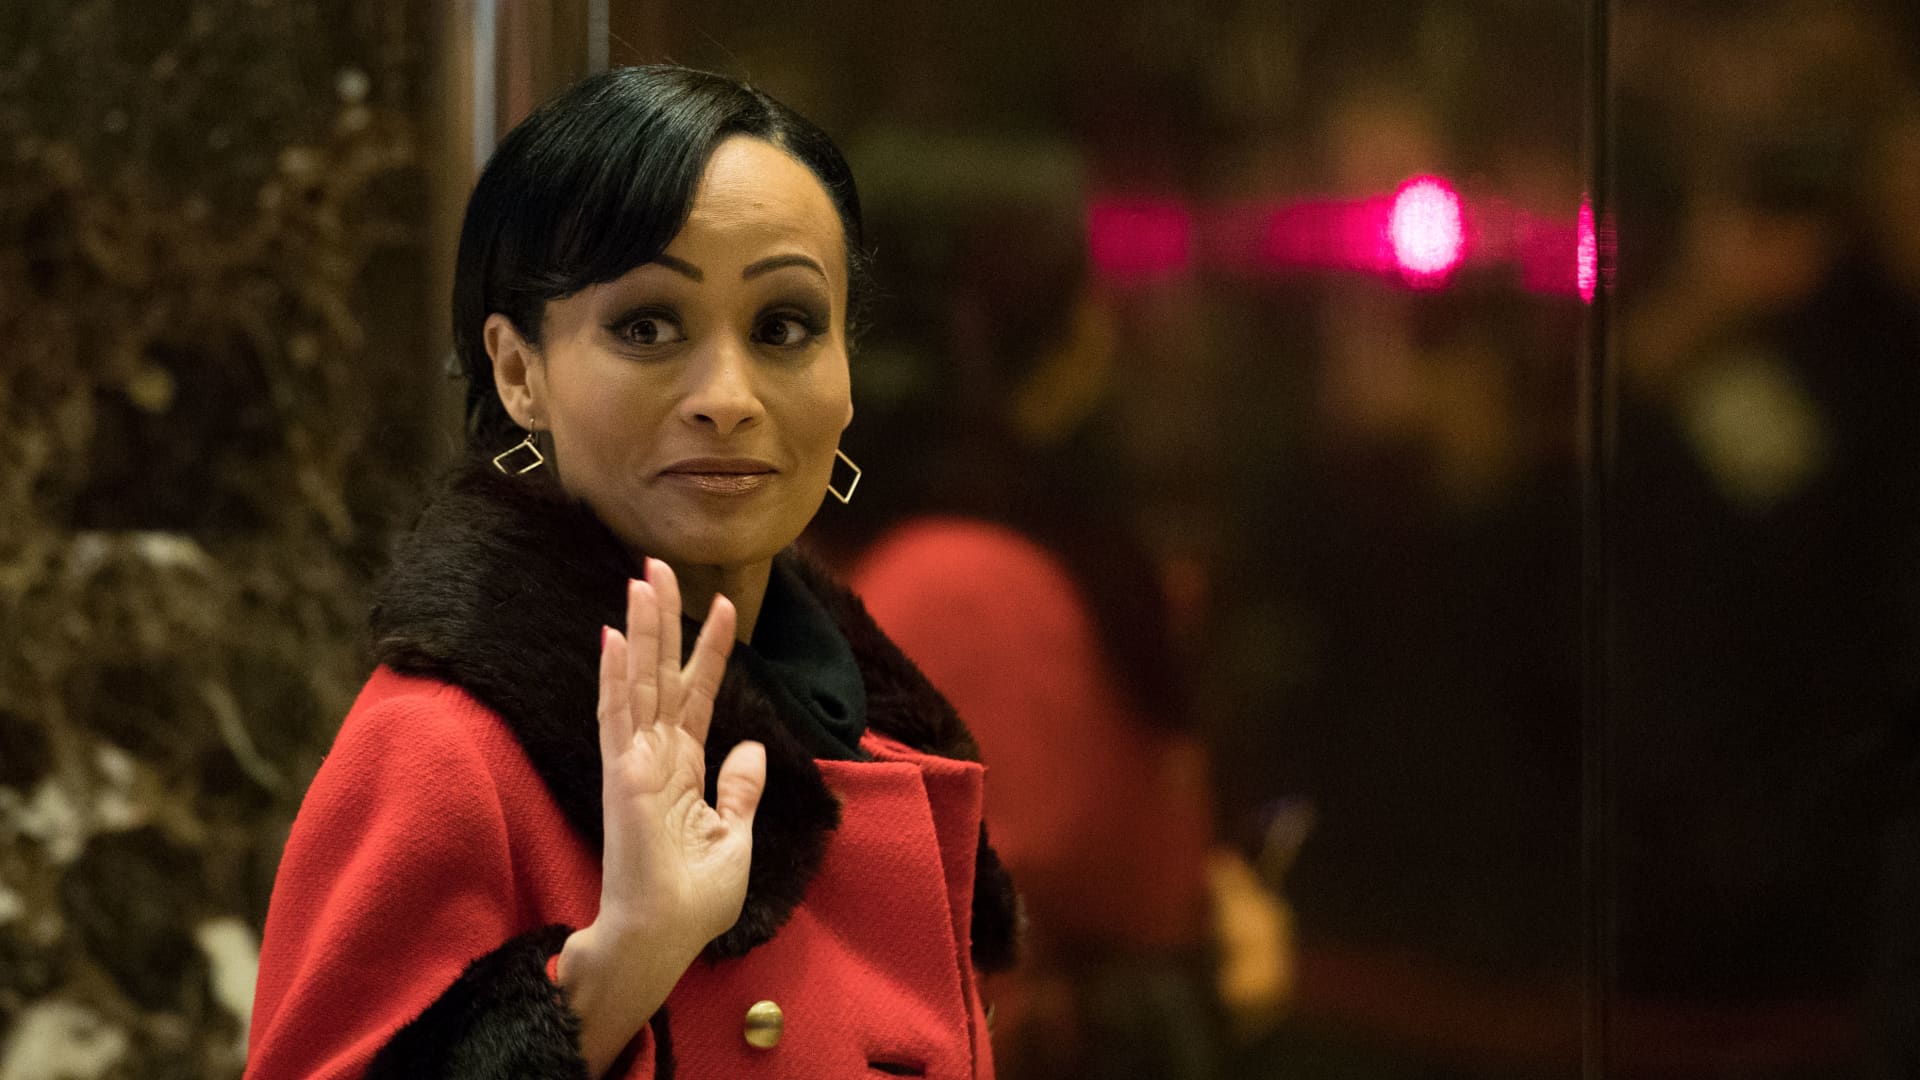 Republican political consultant Katrina Pierson arrives at Trump Tower, December 14, 2016 in New York City. This is the first major meeting between President-elect Trump and technology industry leaders. 